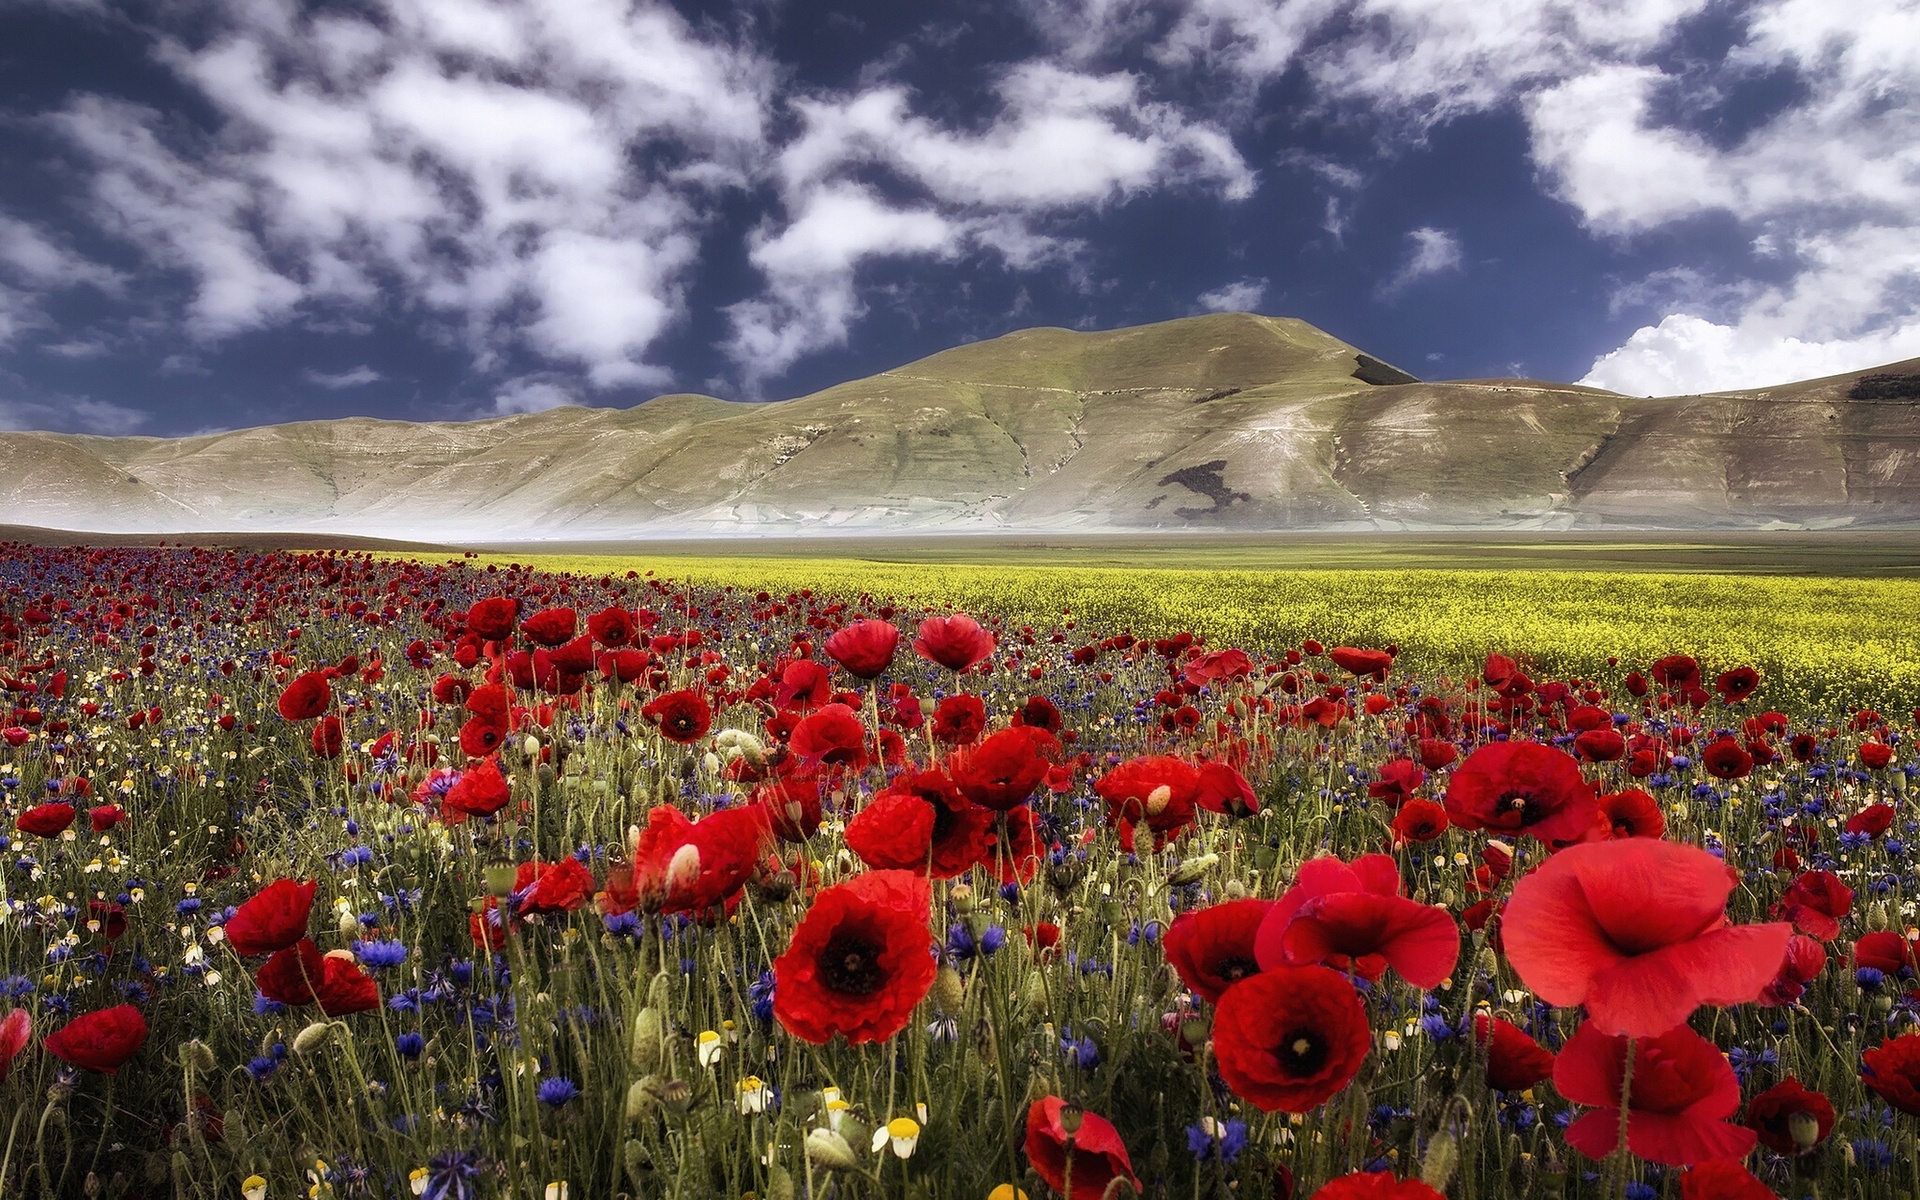 italy, The, Apennines, Mountains, Flowers, Poppies, Cornflowers, Meadow Wallpaper